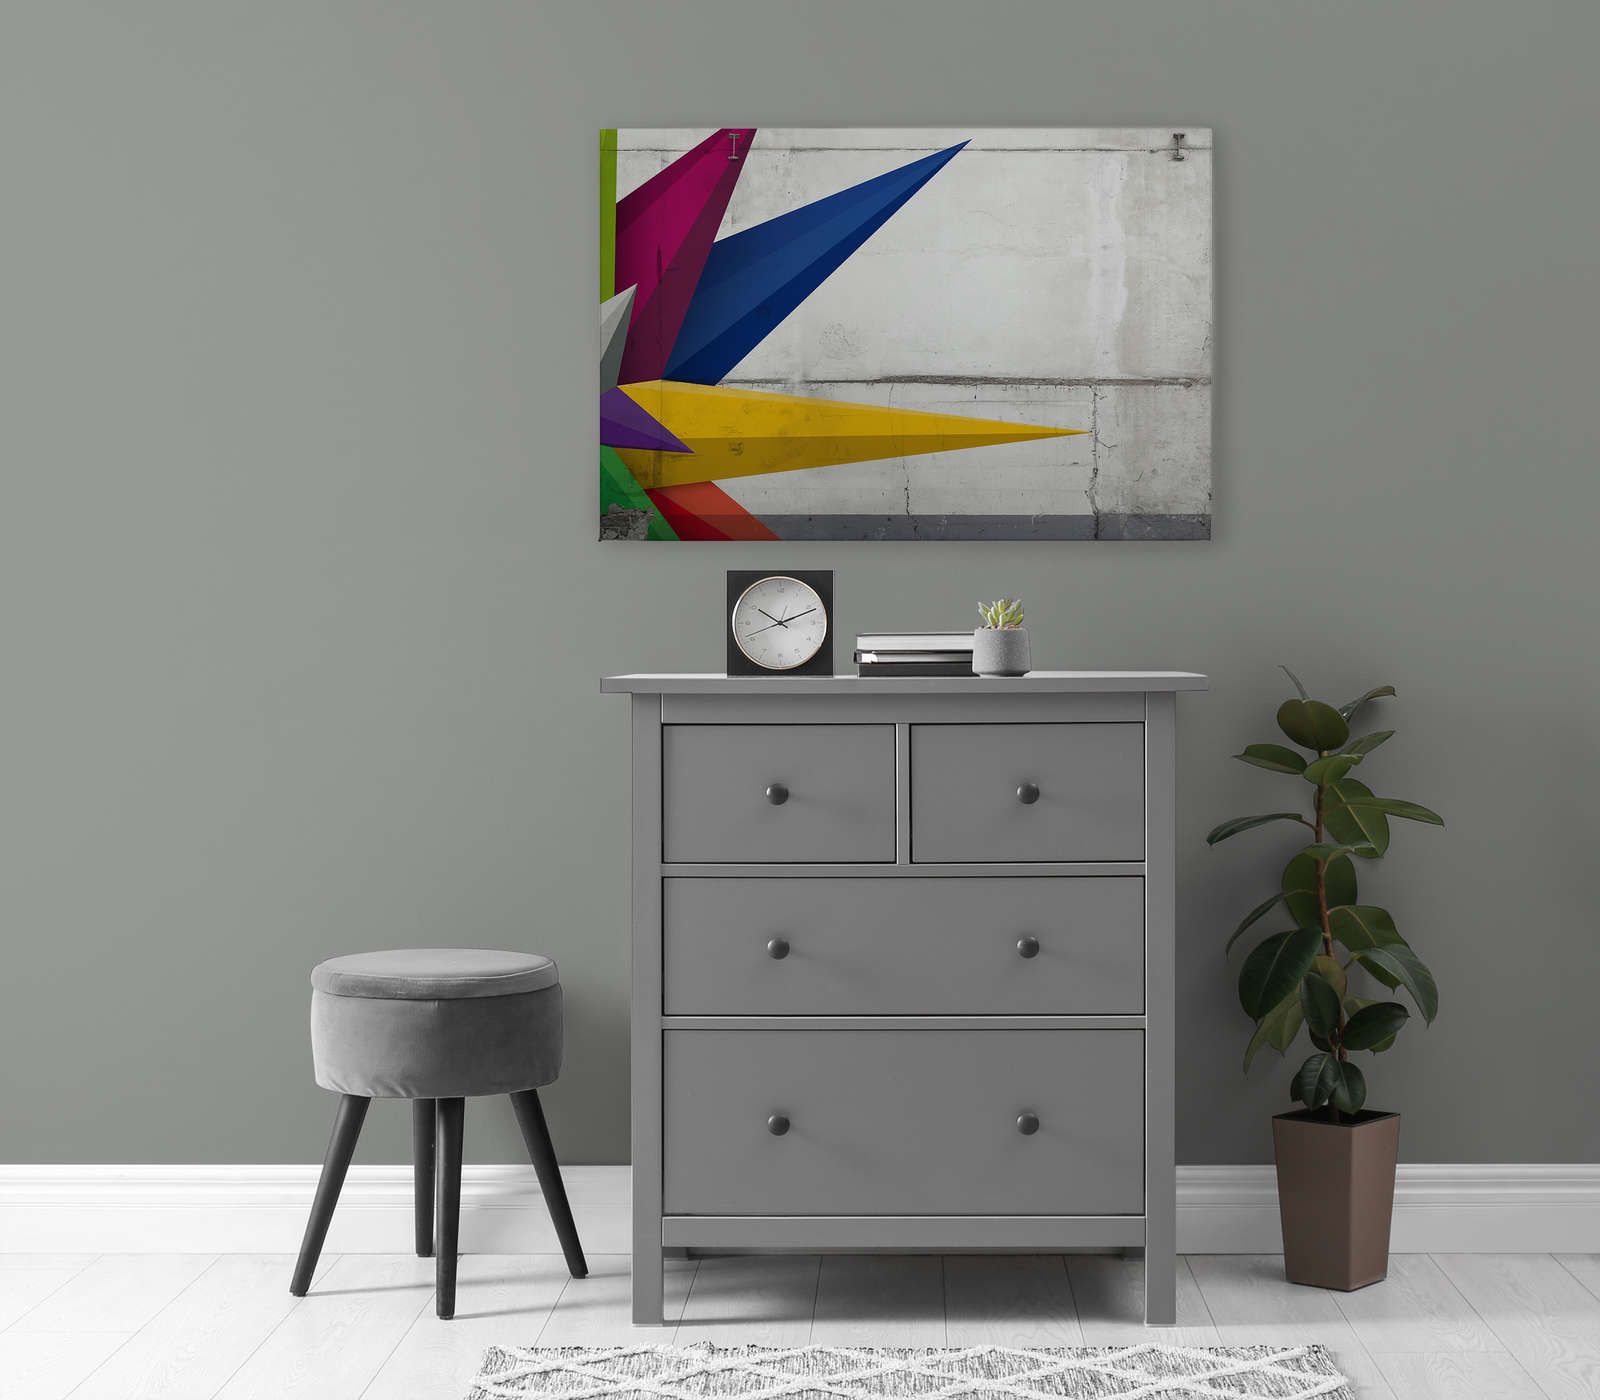             Canvas painting concrete look with graphic design - 0,90 m x 0,60 m
        